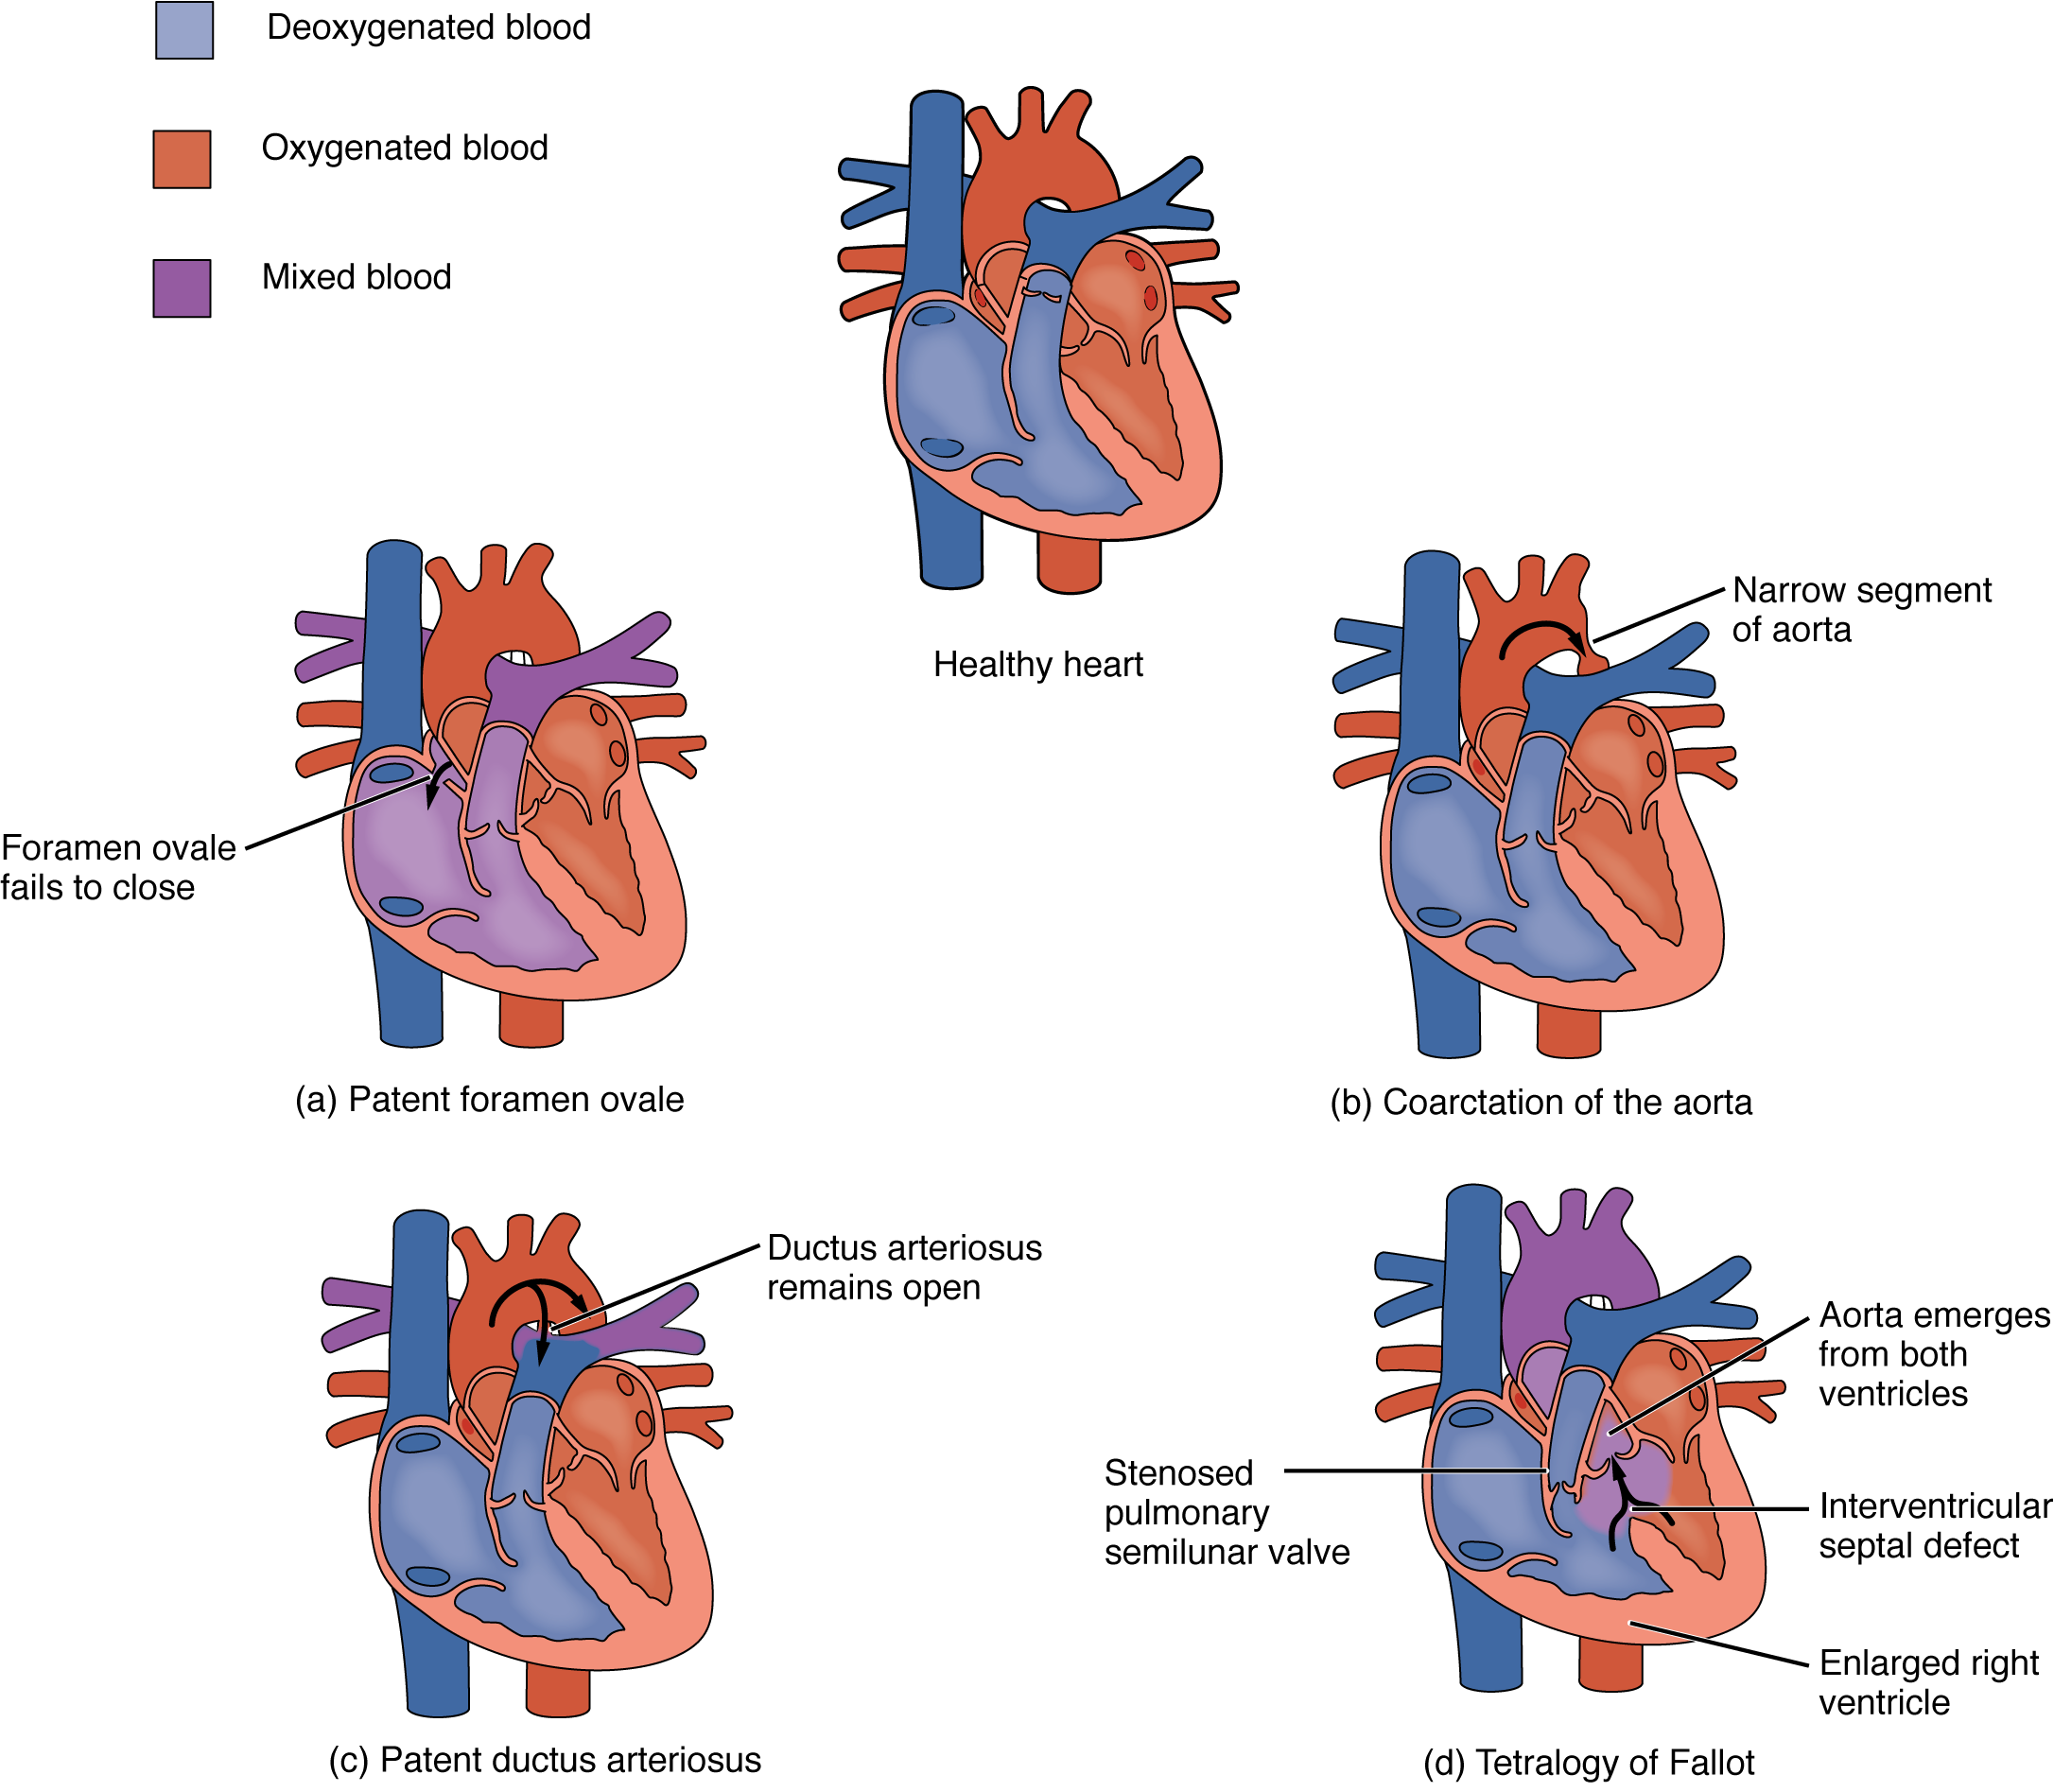 This diagram shows the structure of the heart with different congenital defects. The top left panel shows patent foramen ovale, the top right panel shows coarctation of the aorta, the bottom left panel shows patent ductus ateriosus and the bottom right shows tetralogy of fallot.